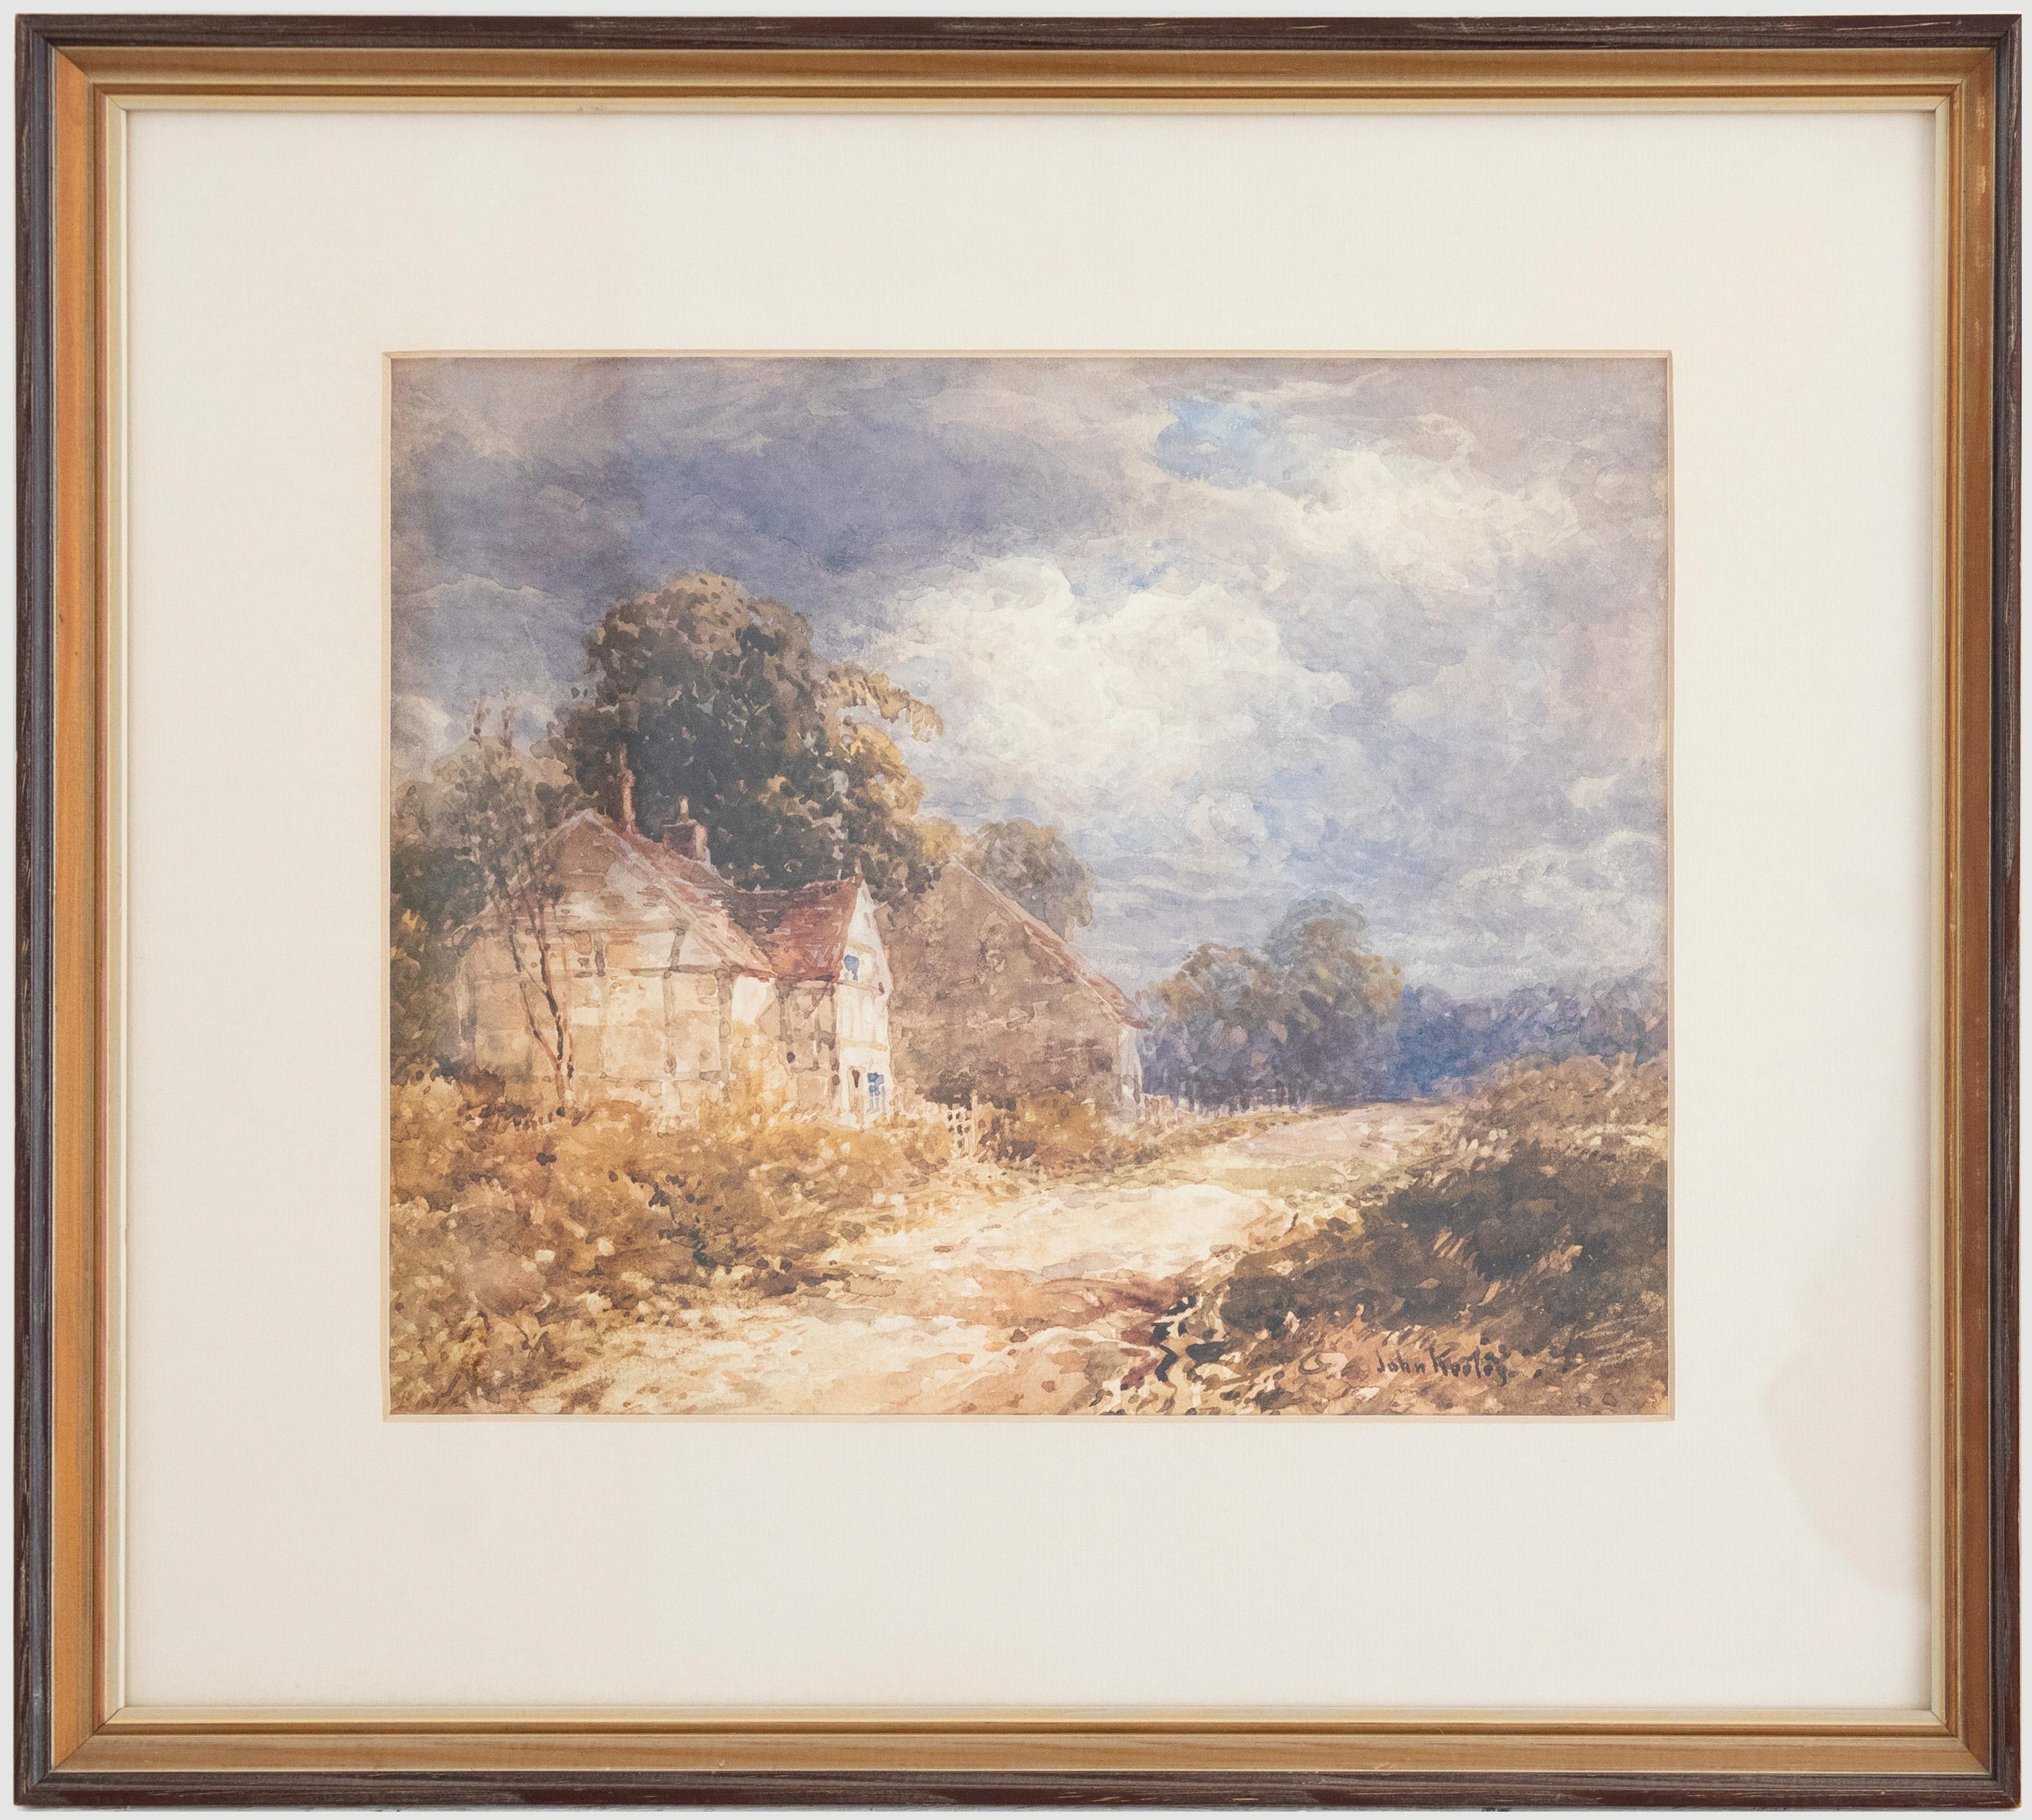 A dynamic watercolour by British artist John Keeley, depicting two woodland cottages side by side in a landscape. The watercolour has been signed by the artist to the lower right. Well-presented in a 20th century veneer wood frame with a cream card